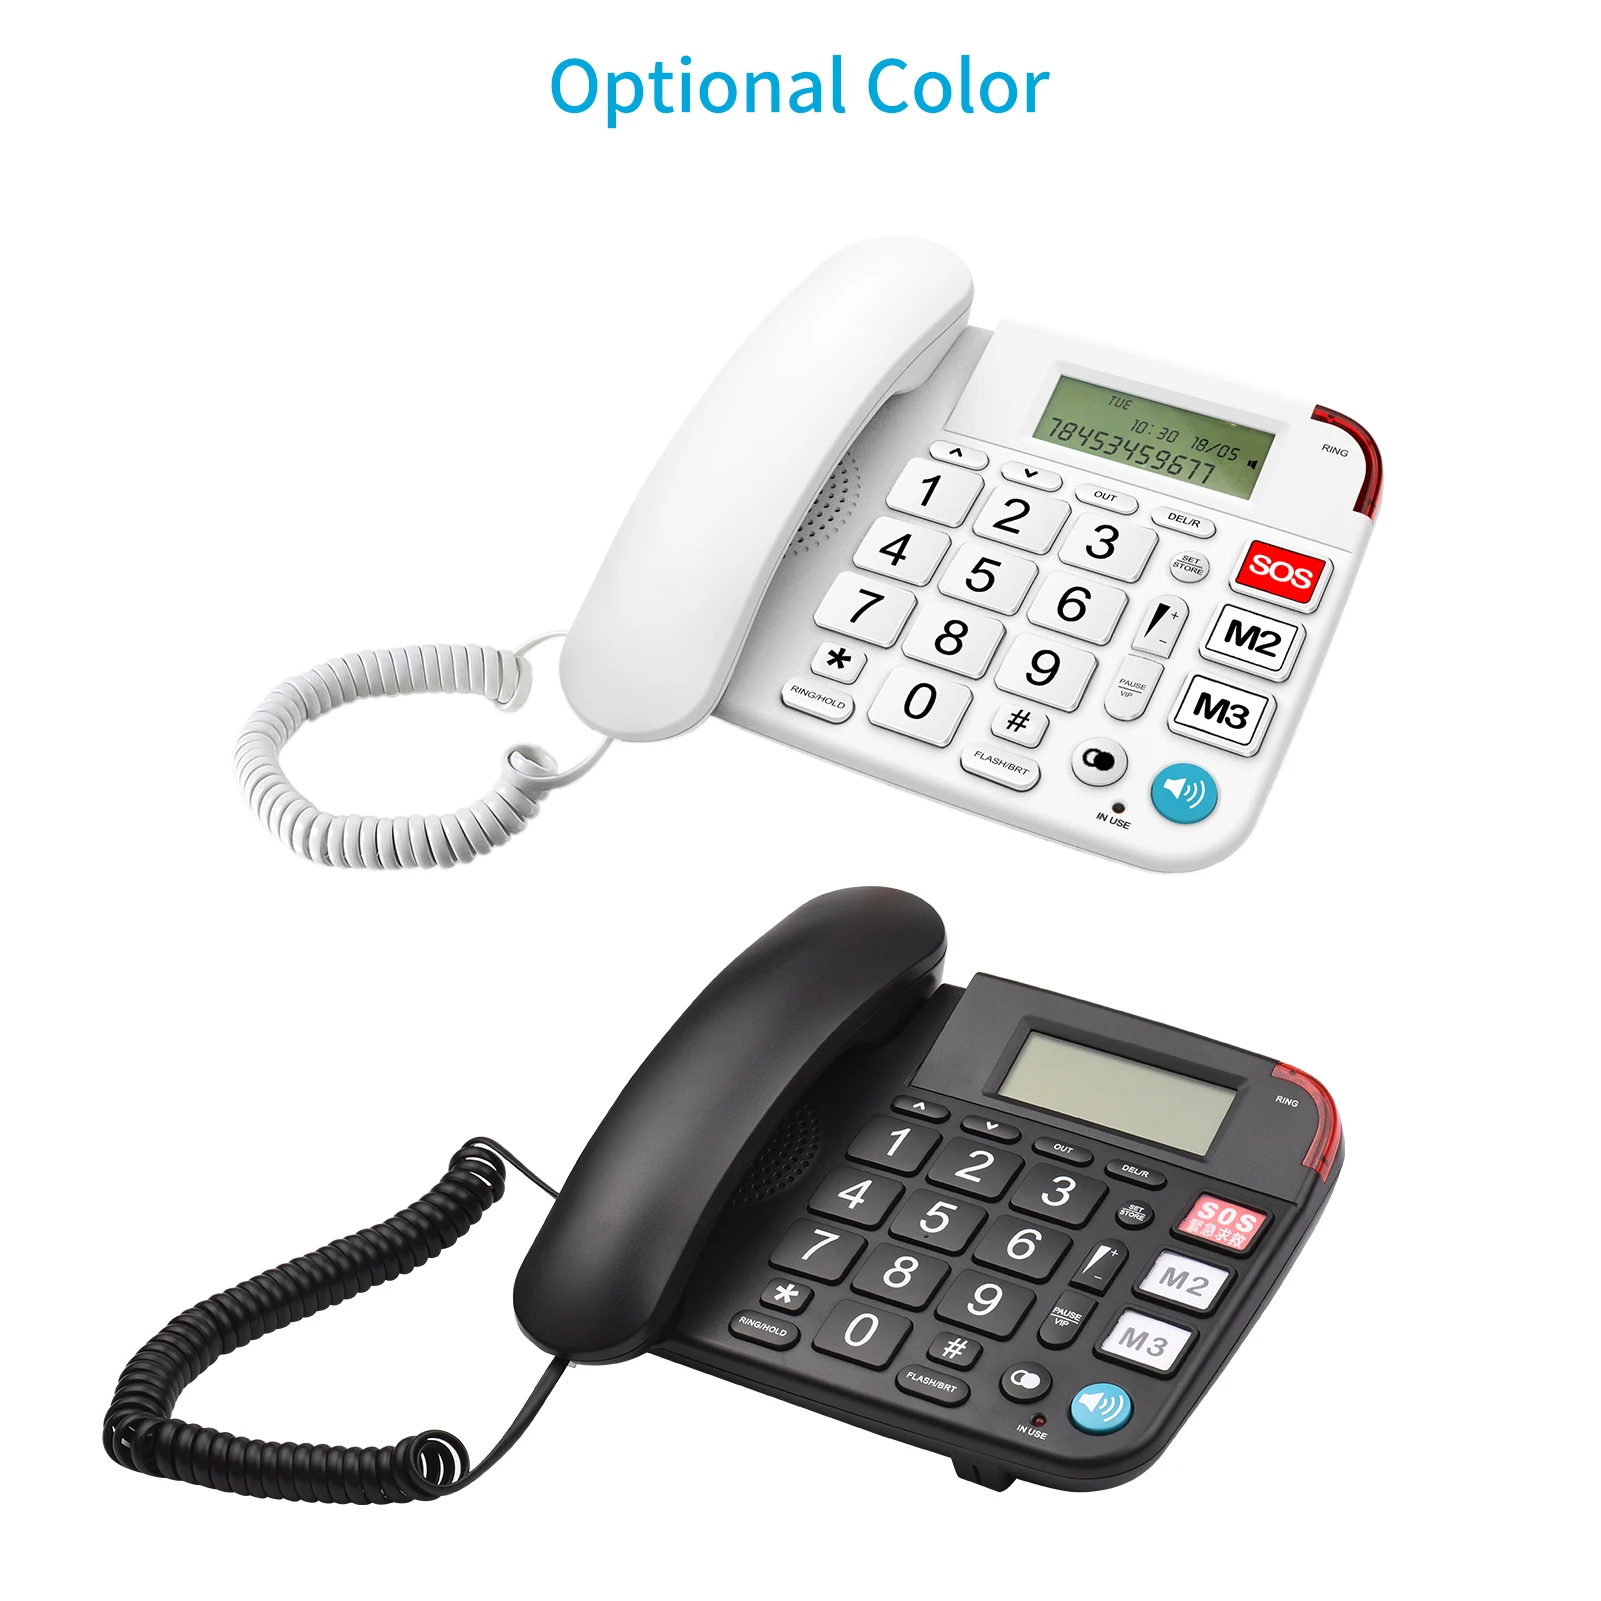 

LCD Desktop Corded Landline Phone Fixed Telephone Big Button for Elderly Seniors Phone Mute/ Pause/ Flash/ Redial/ Hands Free